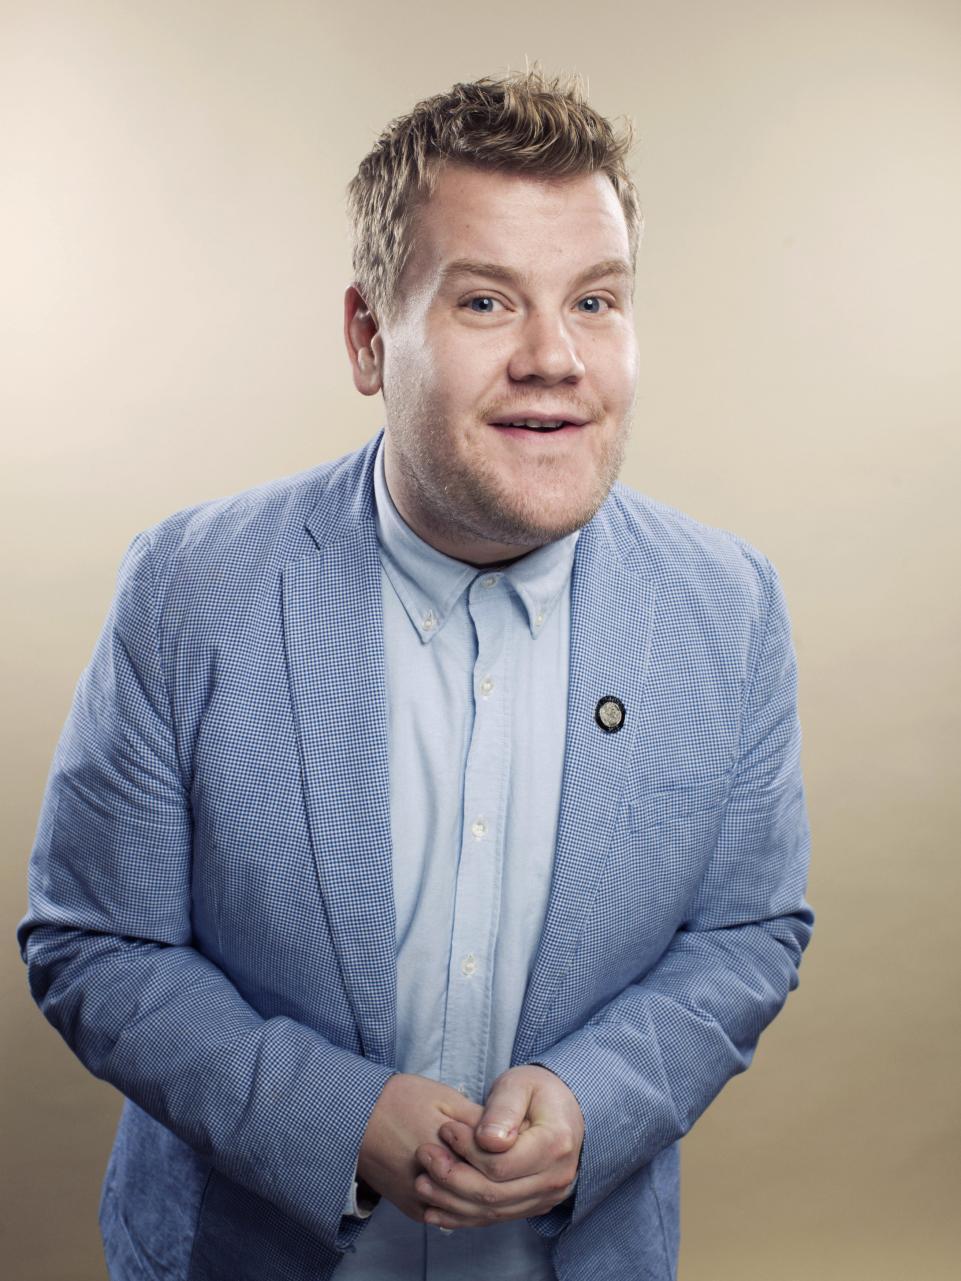 James Corden Hopes To Keep You Up Late Late